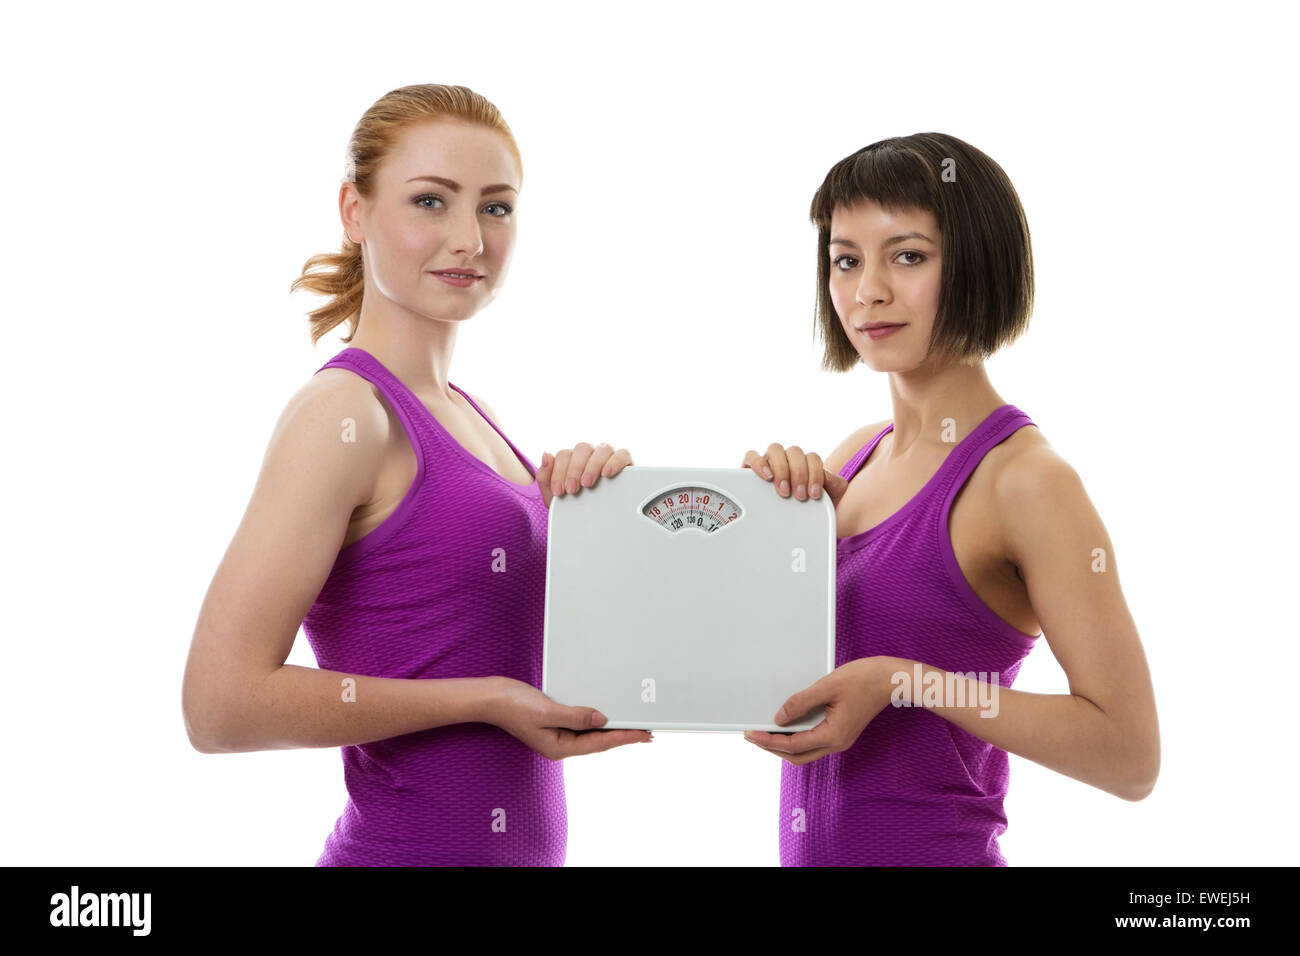 two fitness models holding scales between them Stock Photo